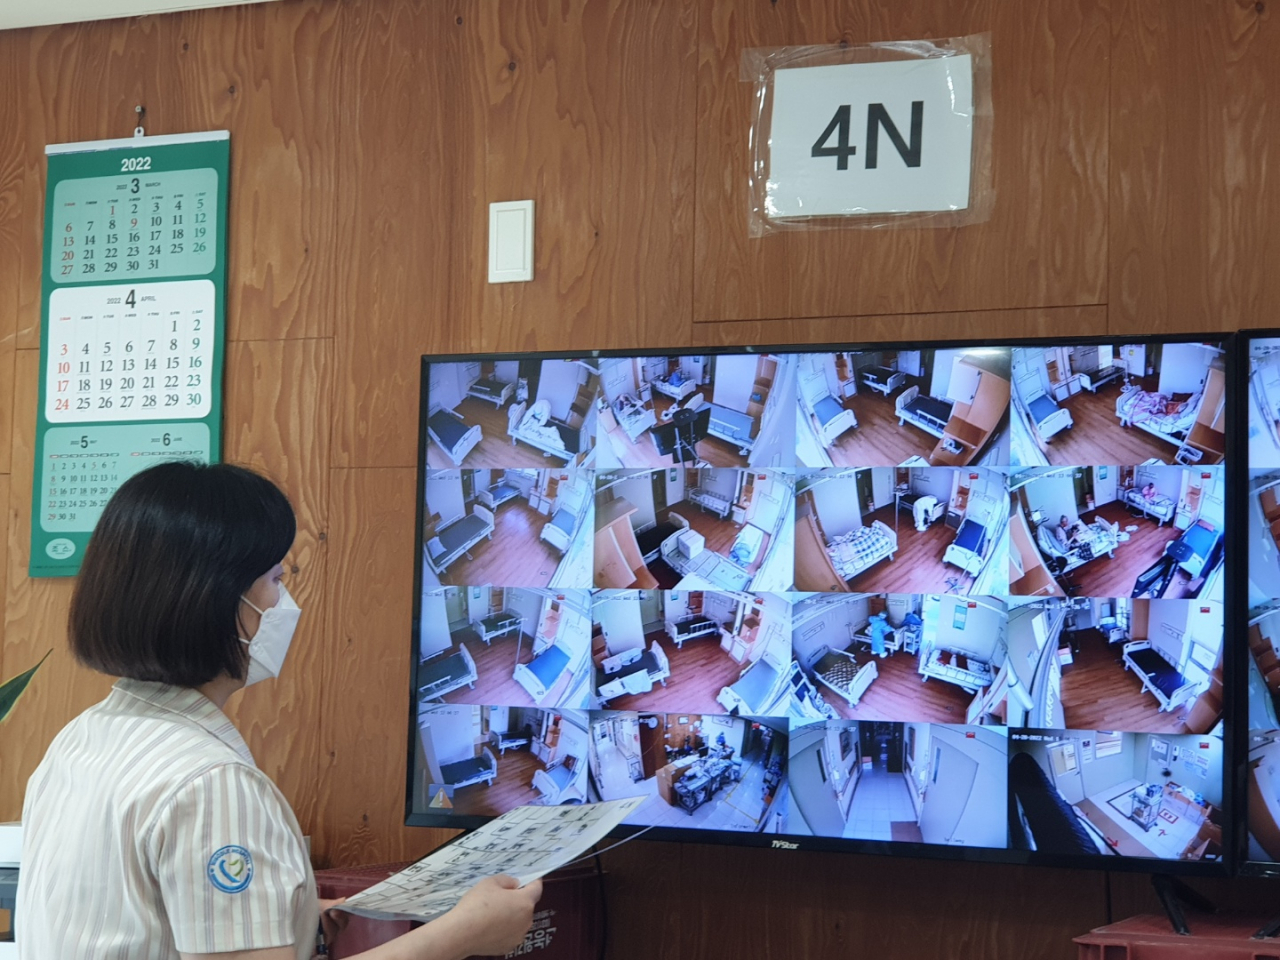 Wee Ji-young, a nurse of 20 years at Misodle Hospital, watches the hospital’s COVID-19 wards through remote monitors. (courtesy of Wee)